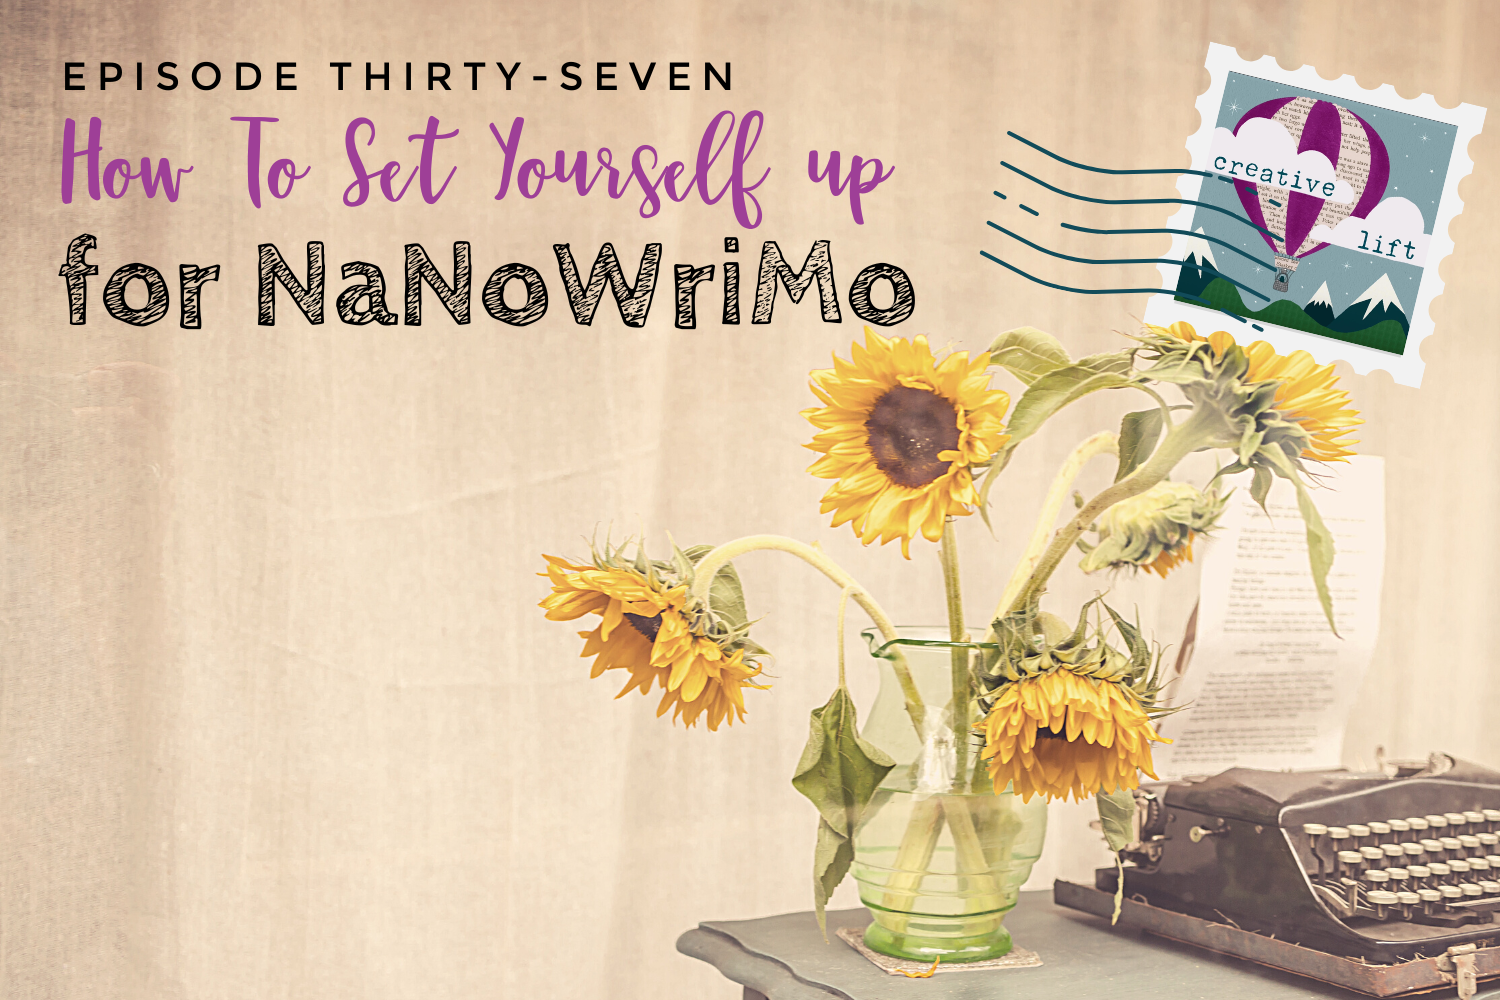 Creative Lift Episode 37- How to Set Yourself Up for NaNoWriMo